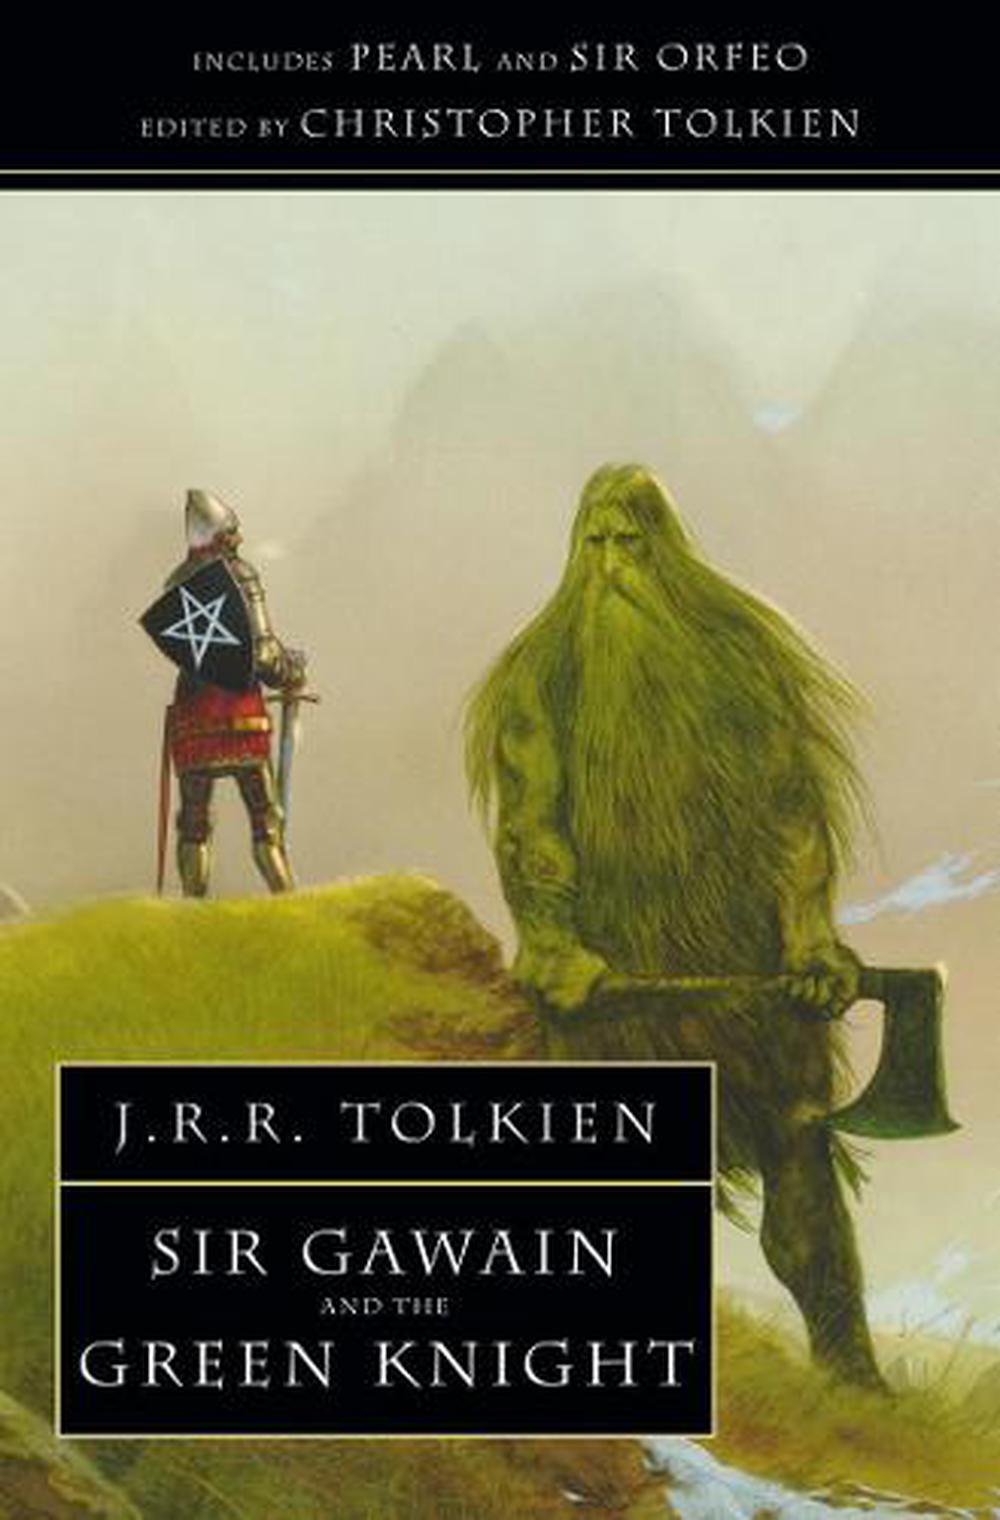 sir gawain and the green knight book review